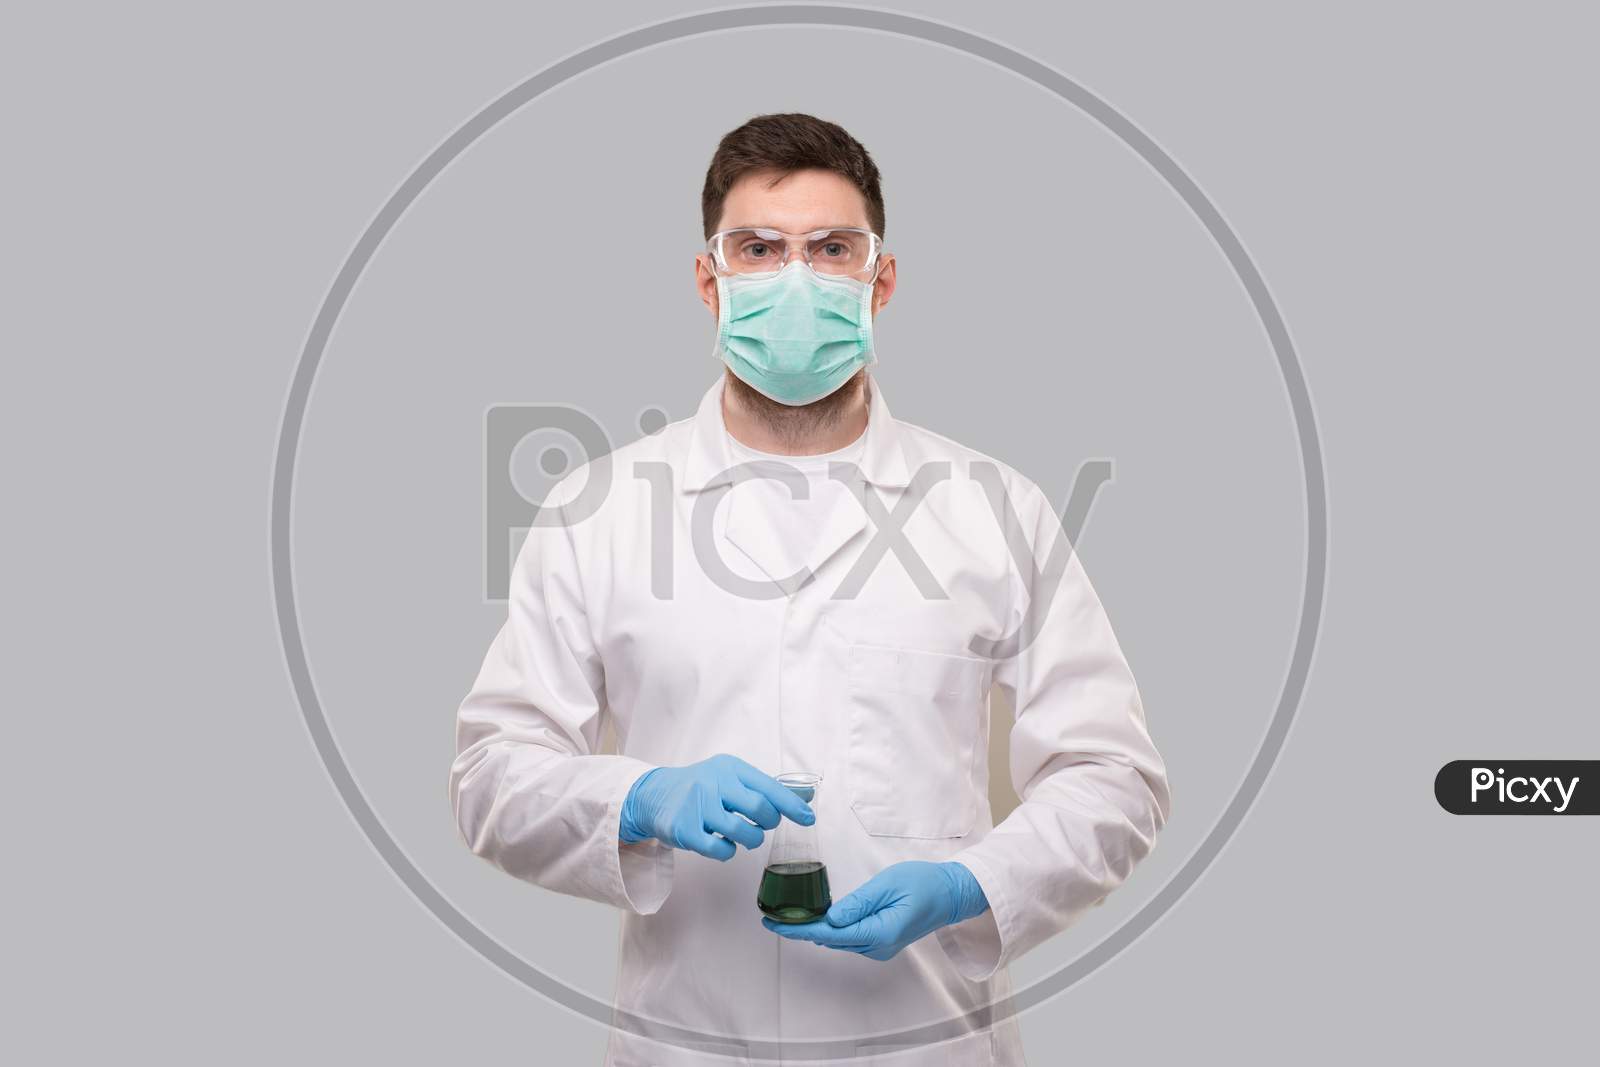 Male Doctor Wearing Medical Mask And Gloves Showing Flask With Colorfull Liquid. Science, Medical, Virus Concept